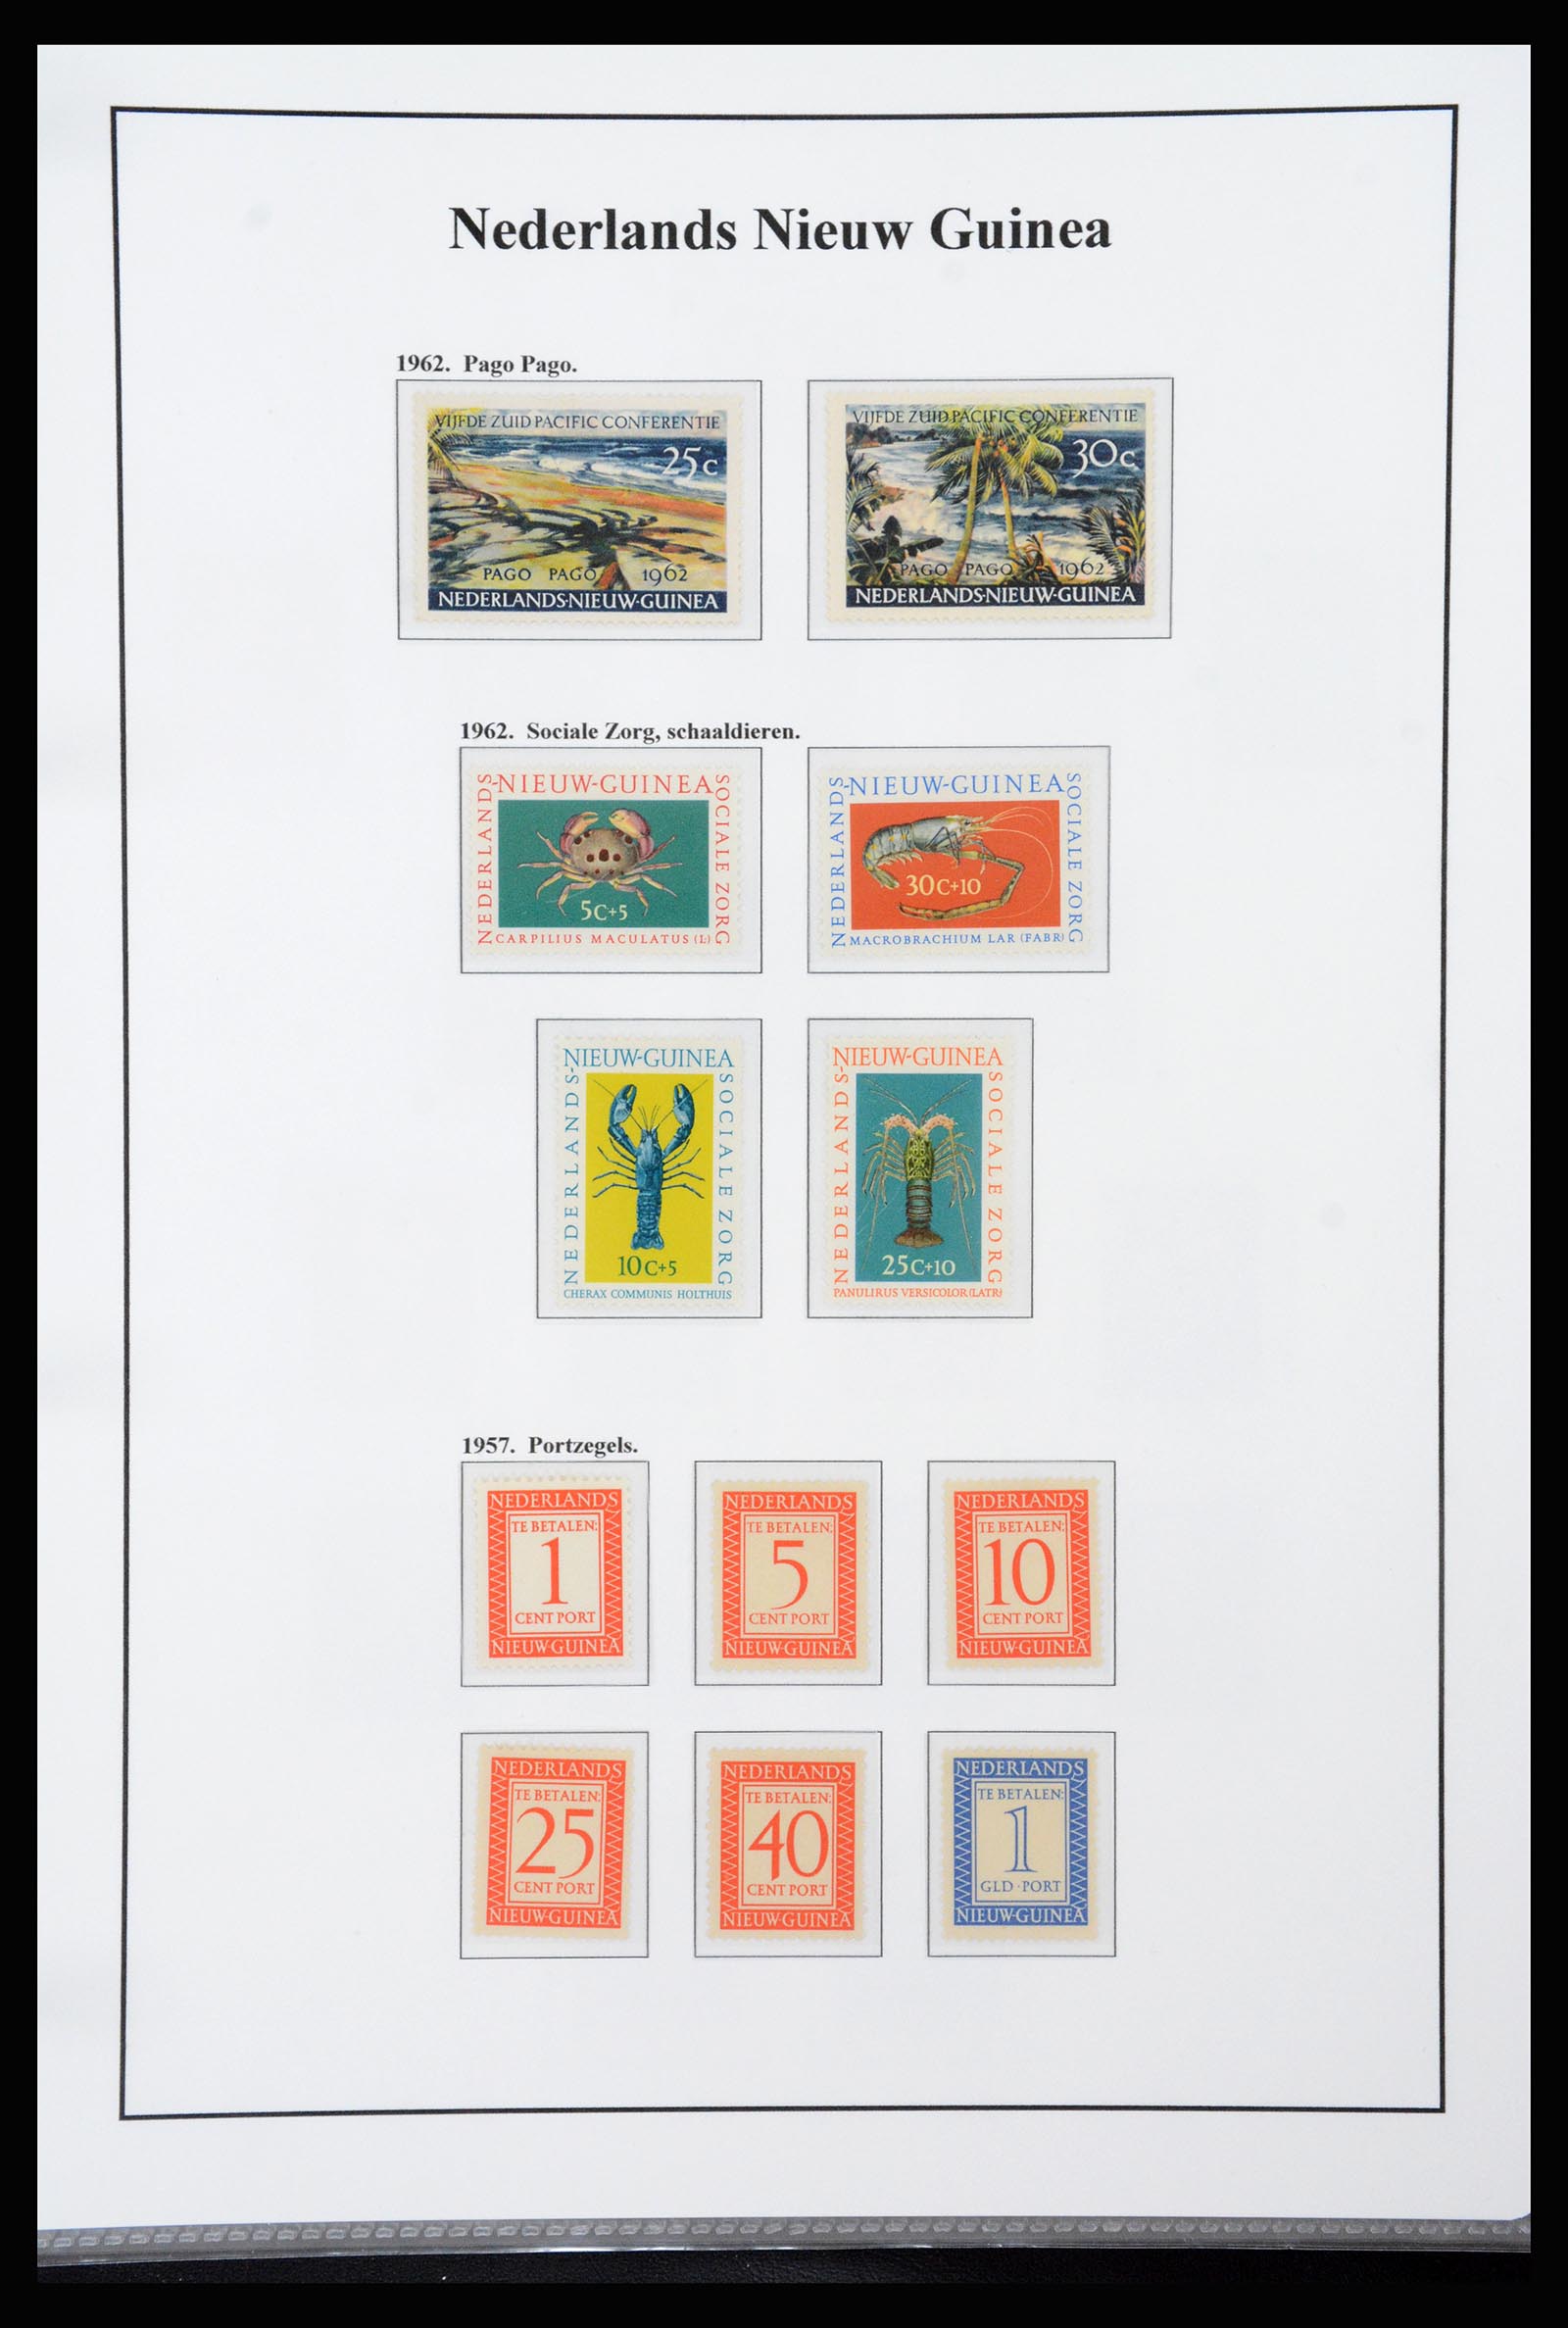 37247 044 - Stamp collection 37247 Dutch east Indies 1864-1949.